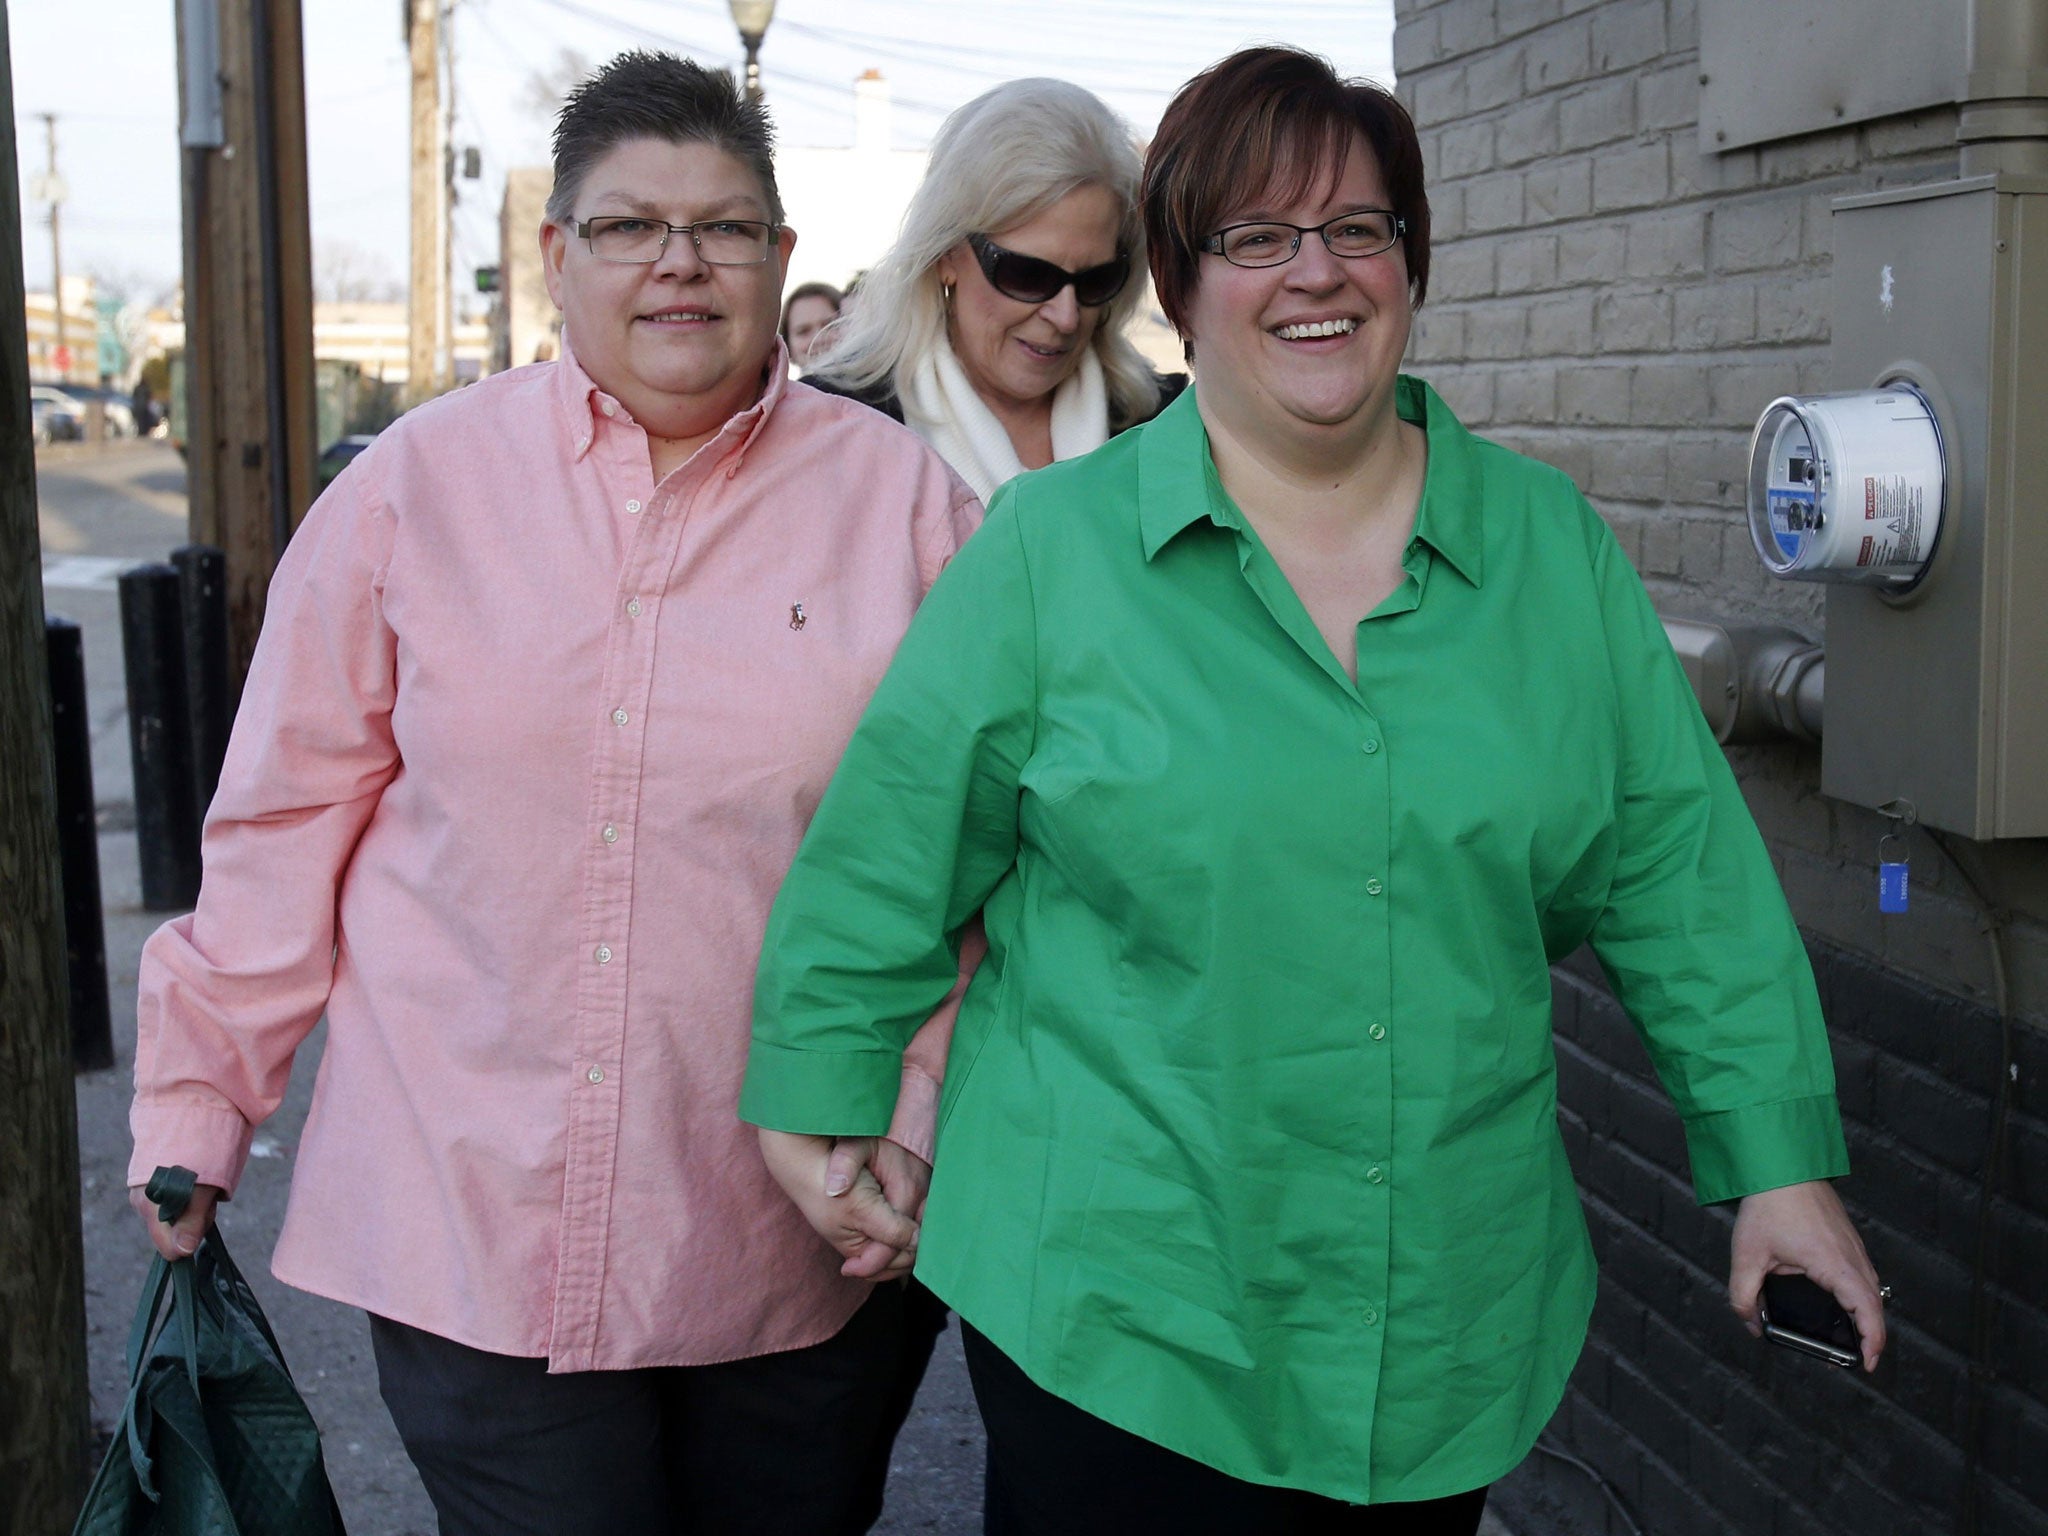 Plaintiffs April DeBoer (R) and her partner Jayne Rowse hold hands as they arrive at the Affirmations Center for a news conference after a Michigan federal judge ruled that a ban on same-sex marriage violates the US Constitution and must be overturned, in